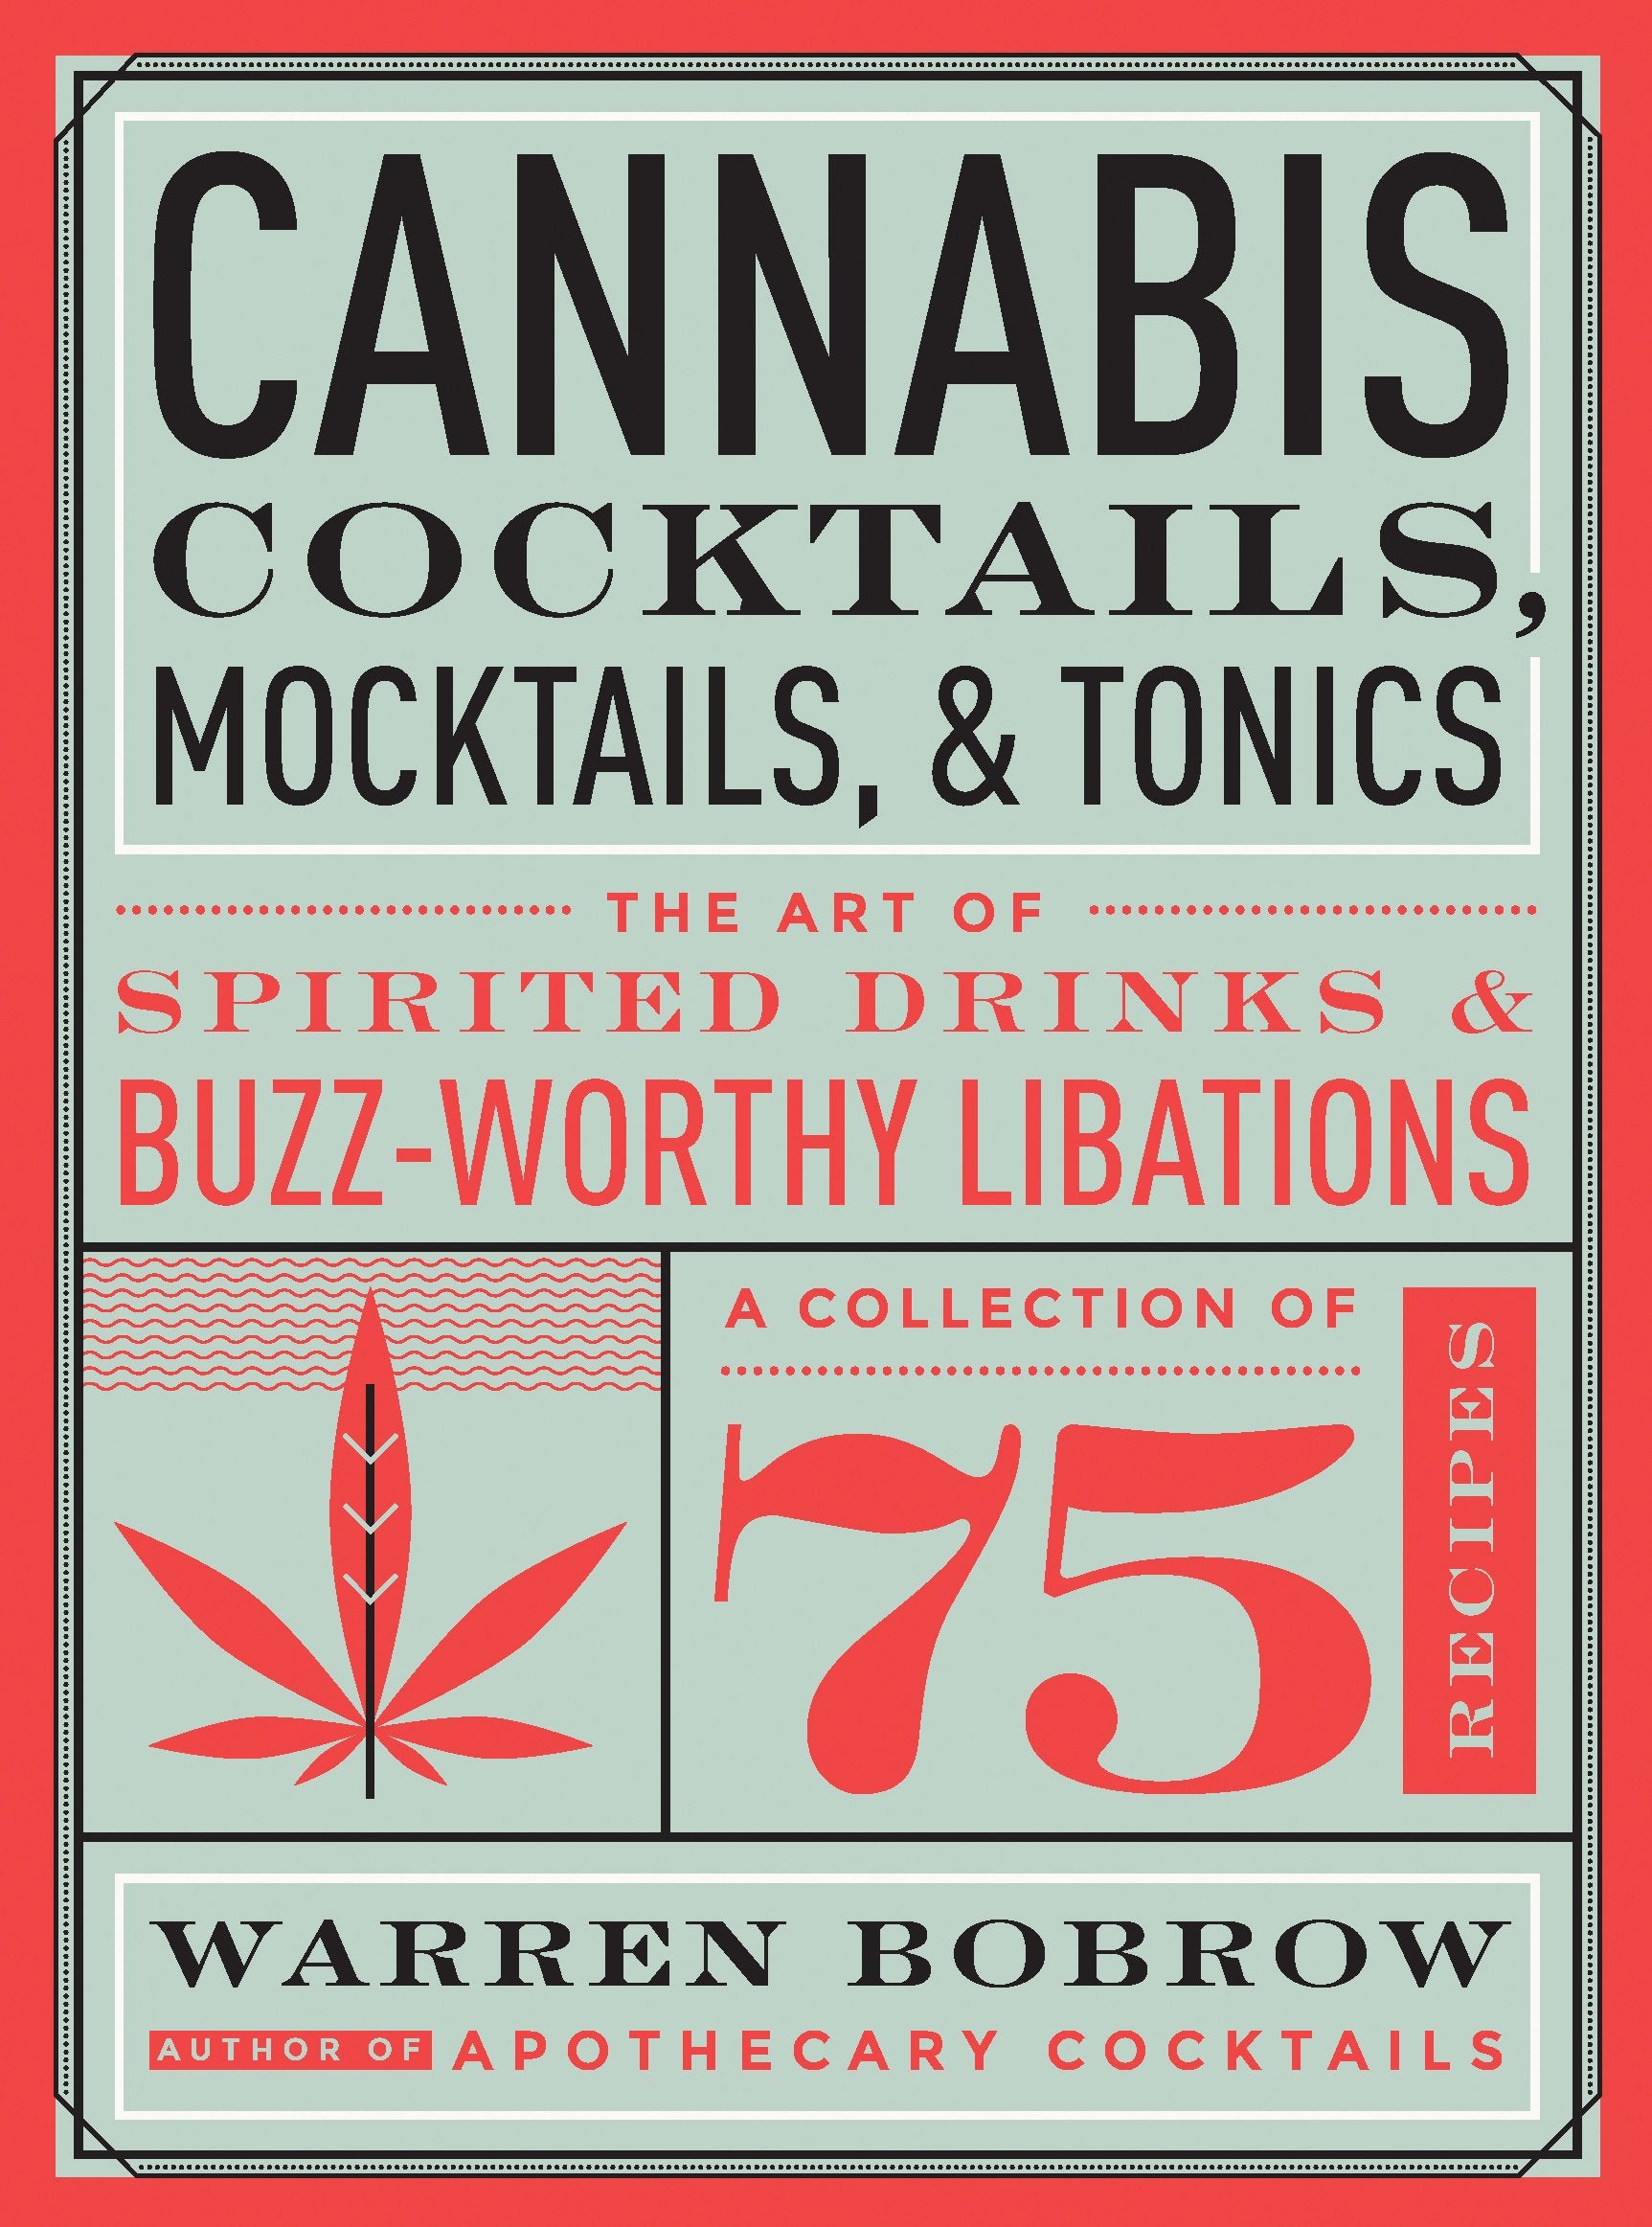 Cannabis Cocktails, Mocktails & Tonics: The Art of Spirited Drinks and Buzz-Worthy Libations (Warren Bobrow)